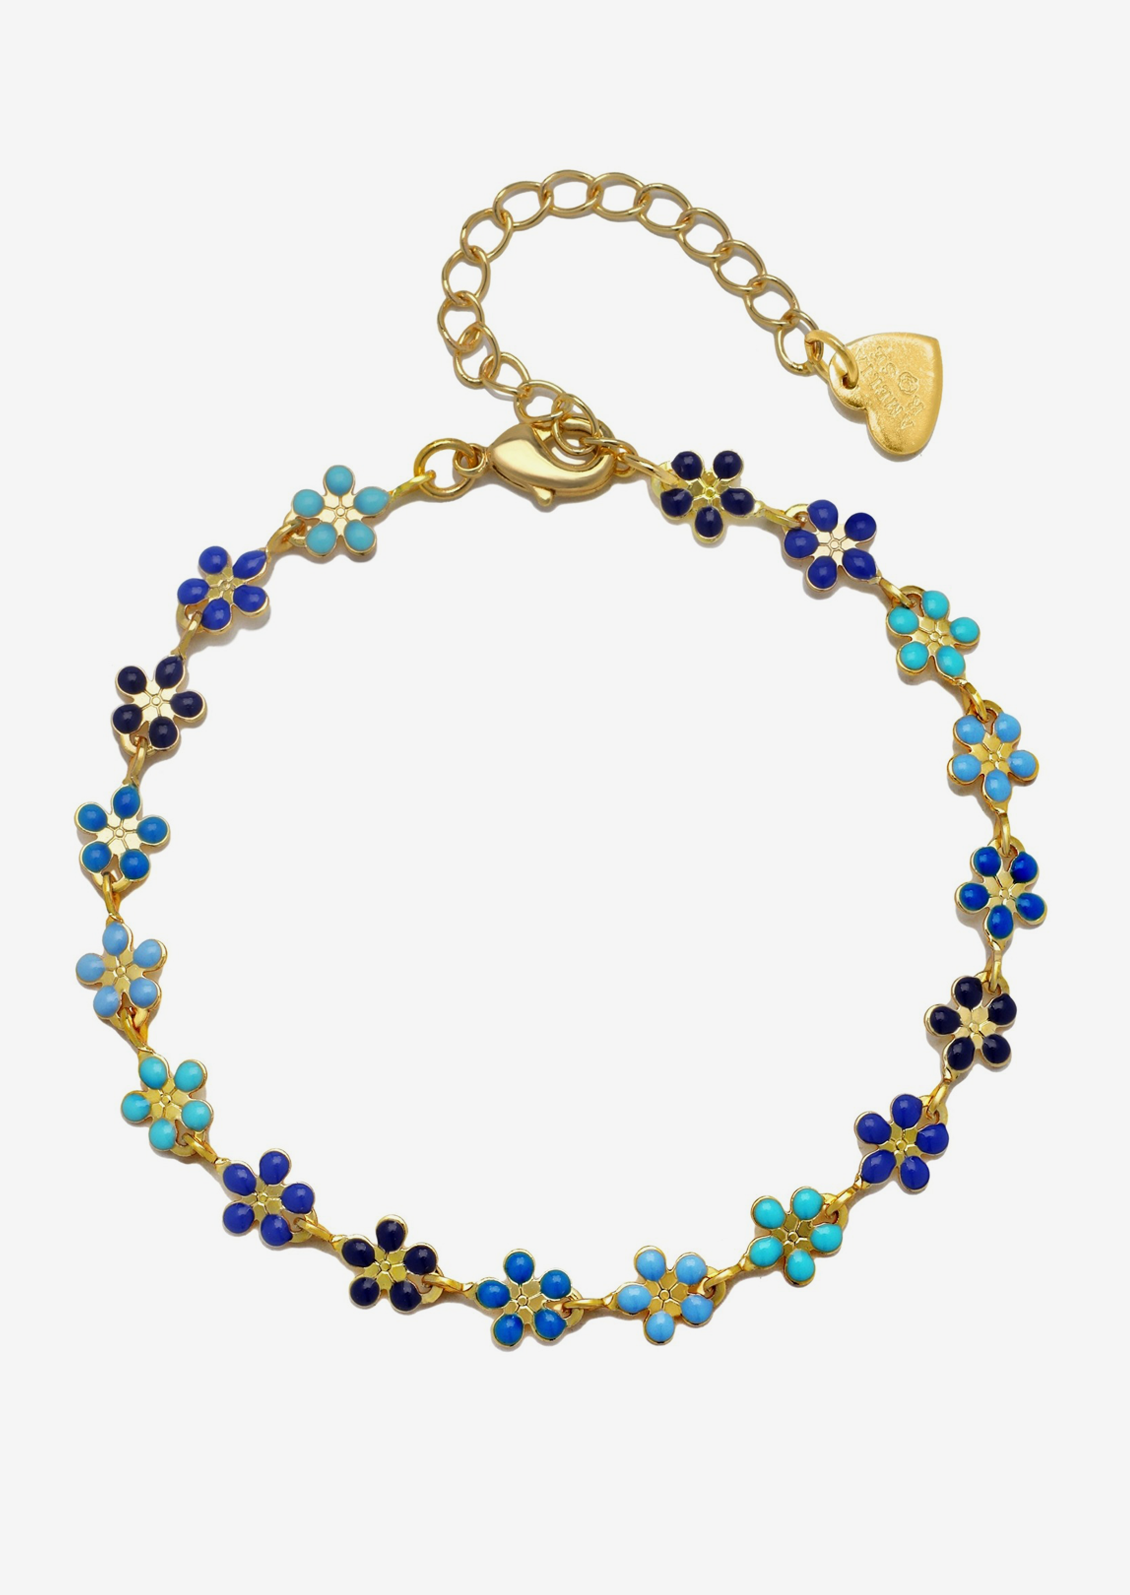 A gold bracelet with allover small enameled flowers in blue mix.